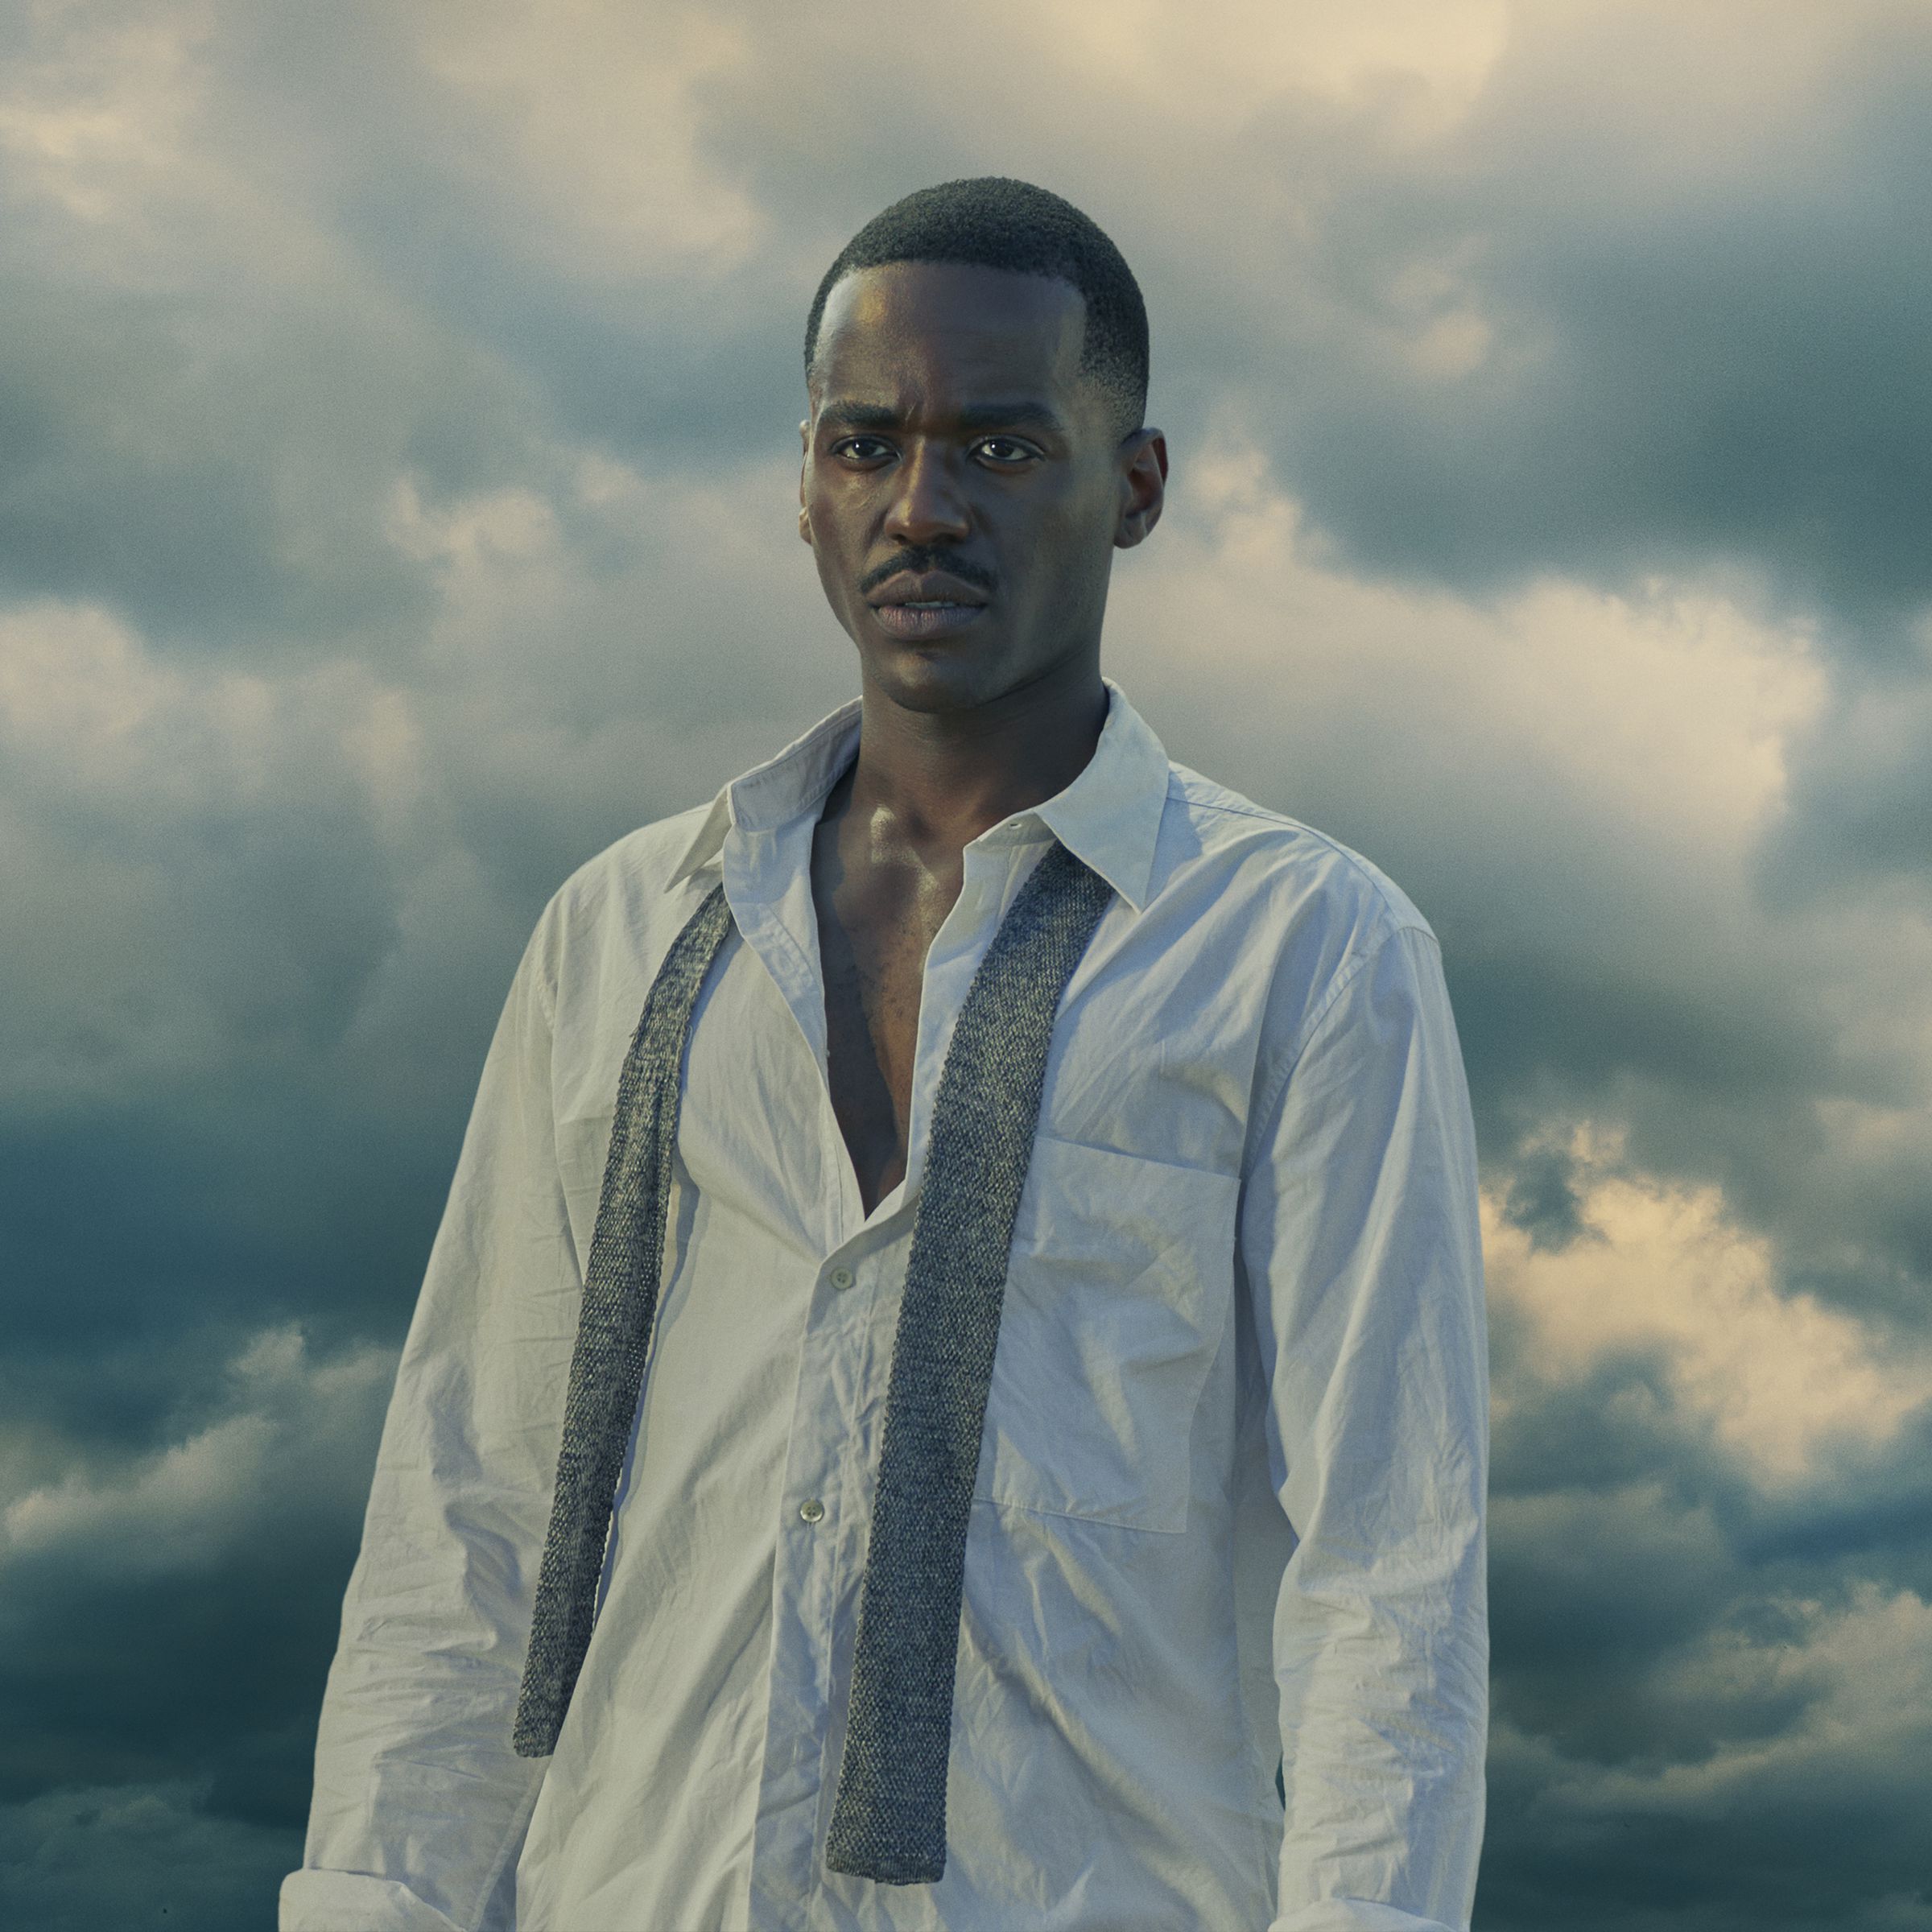 A Black man with a very close fade standing in a white button down shirt with an undone tie around his neck.